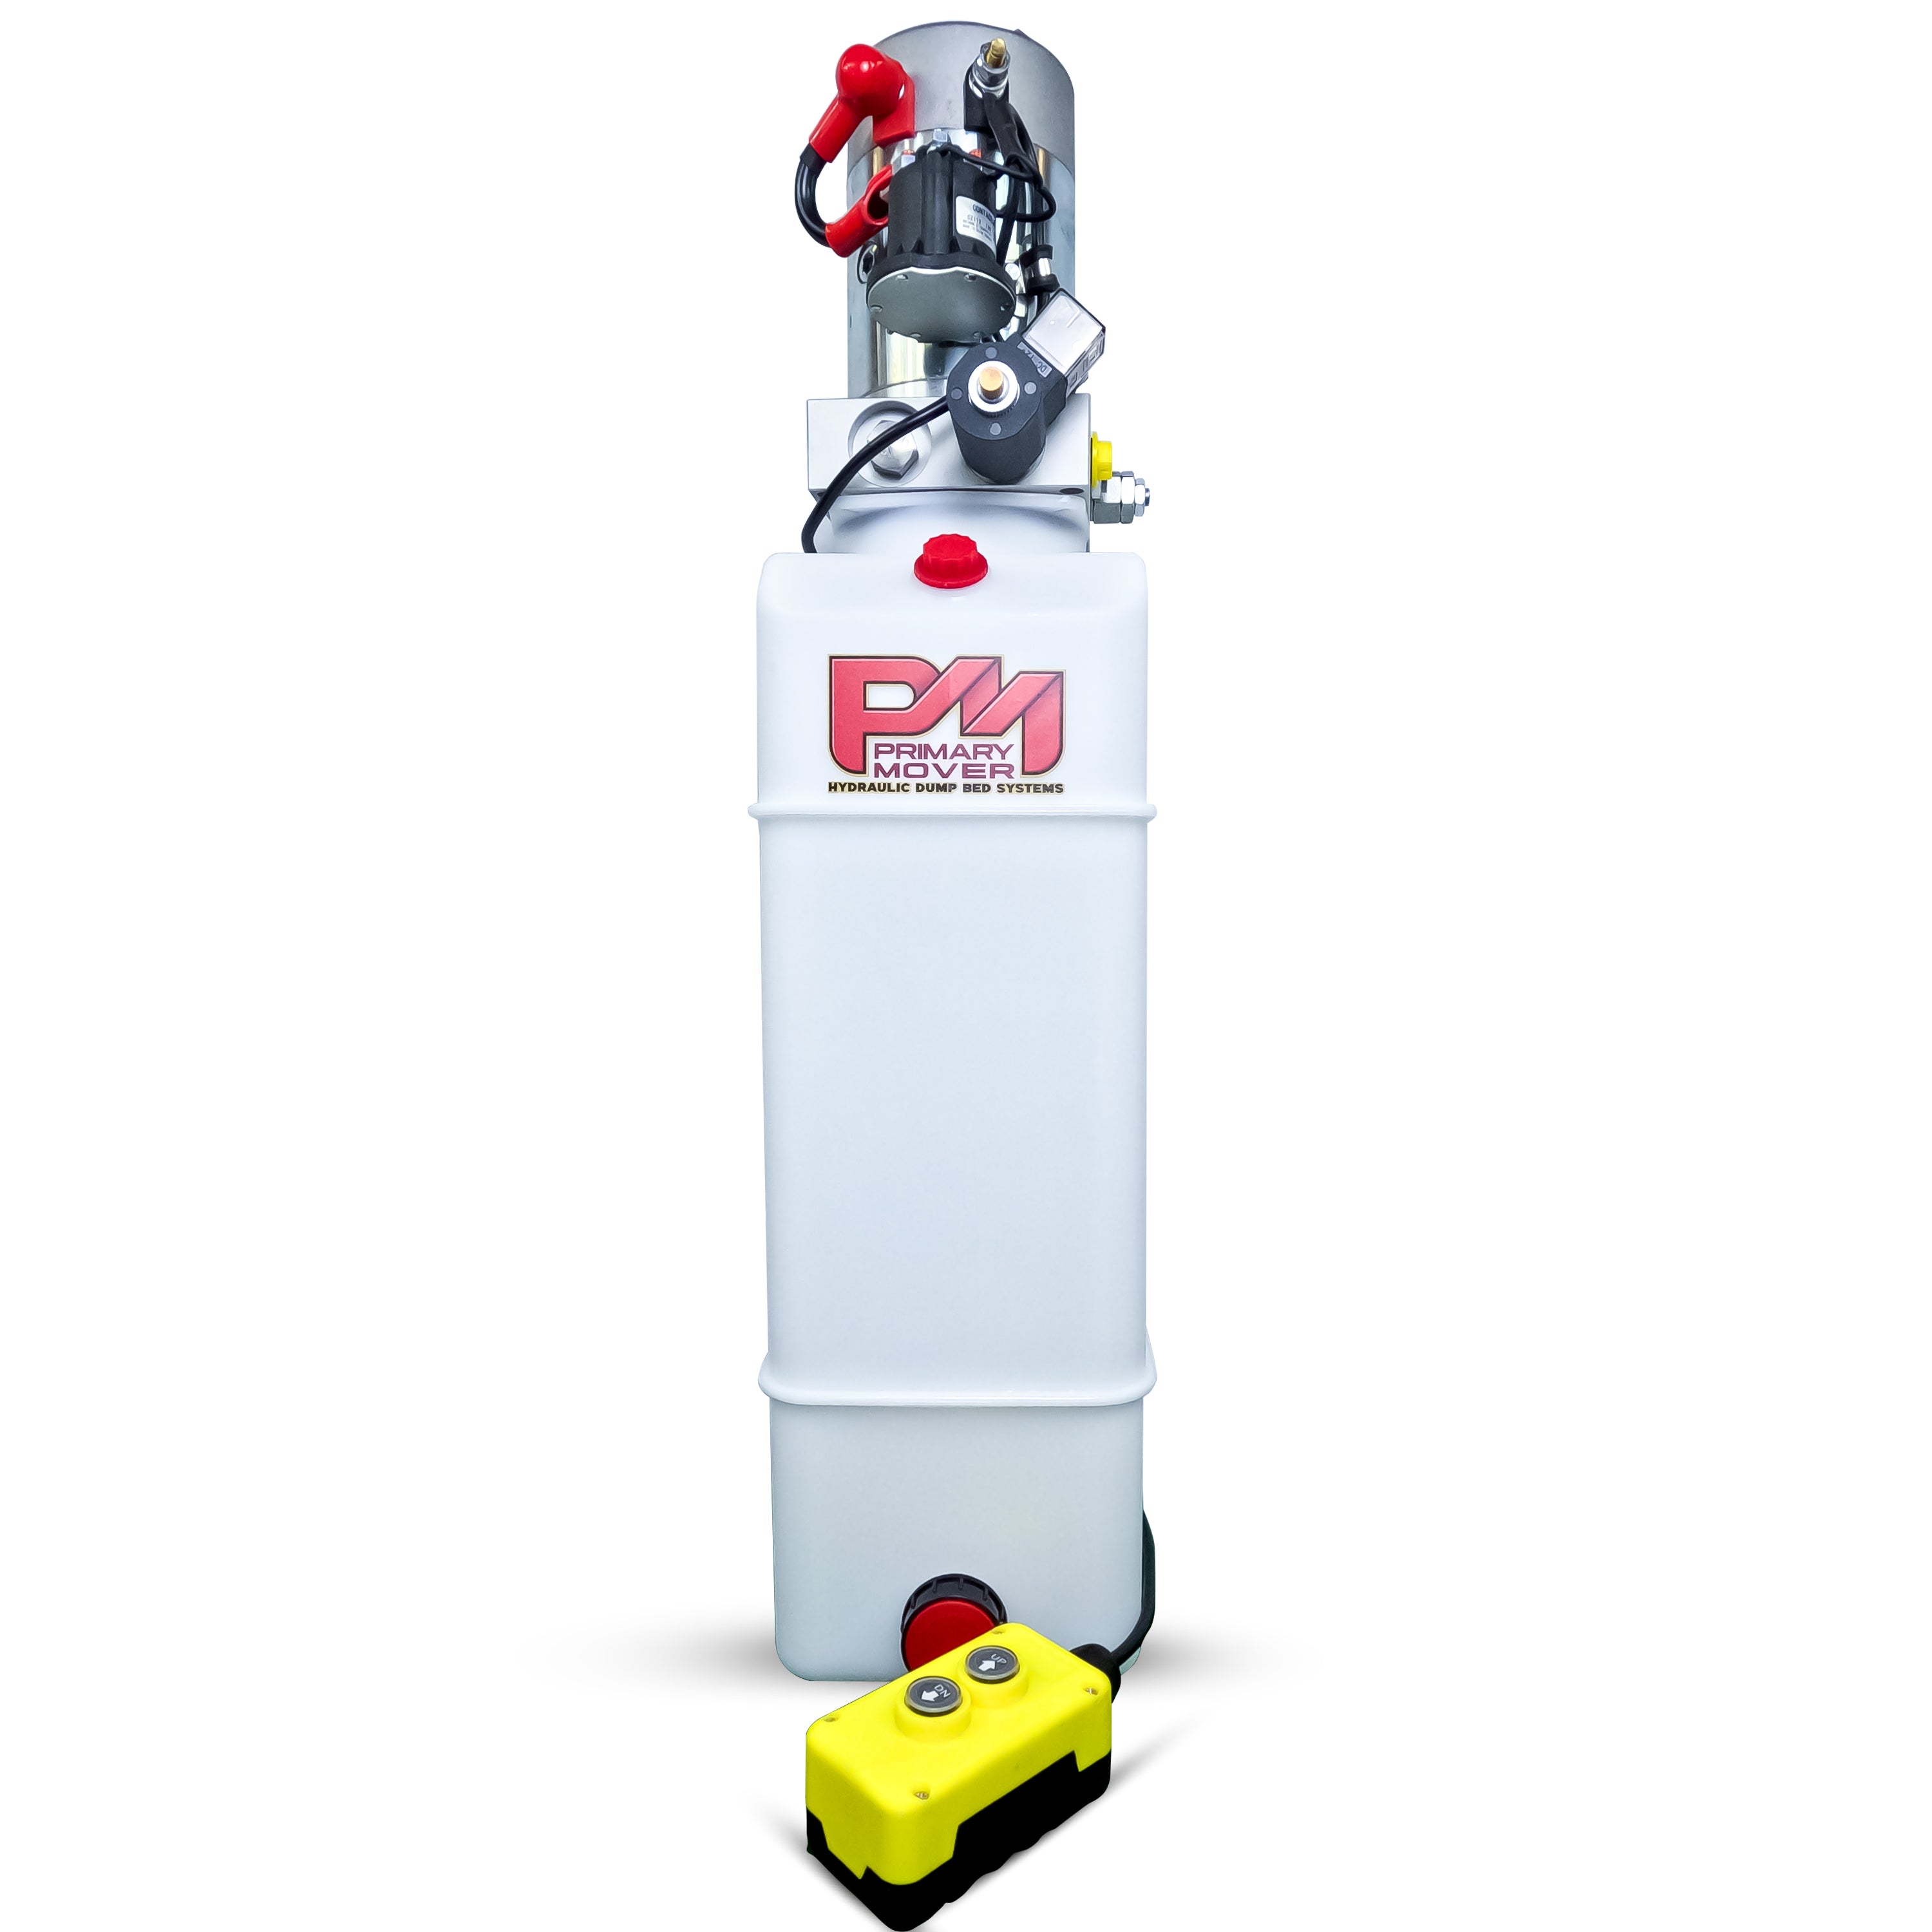 Primary Mover 12V Single-Acting Hydraulic Pump - Poly Reservoir: A white cylinder with yellow switch, black buttons, and pink text, designed for hydraulic dump bed systems.